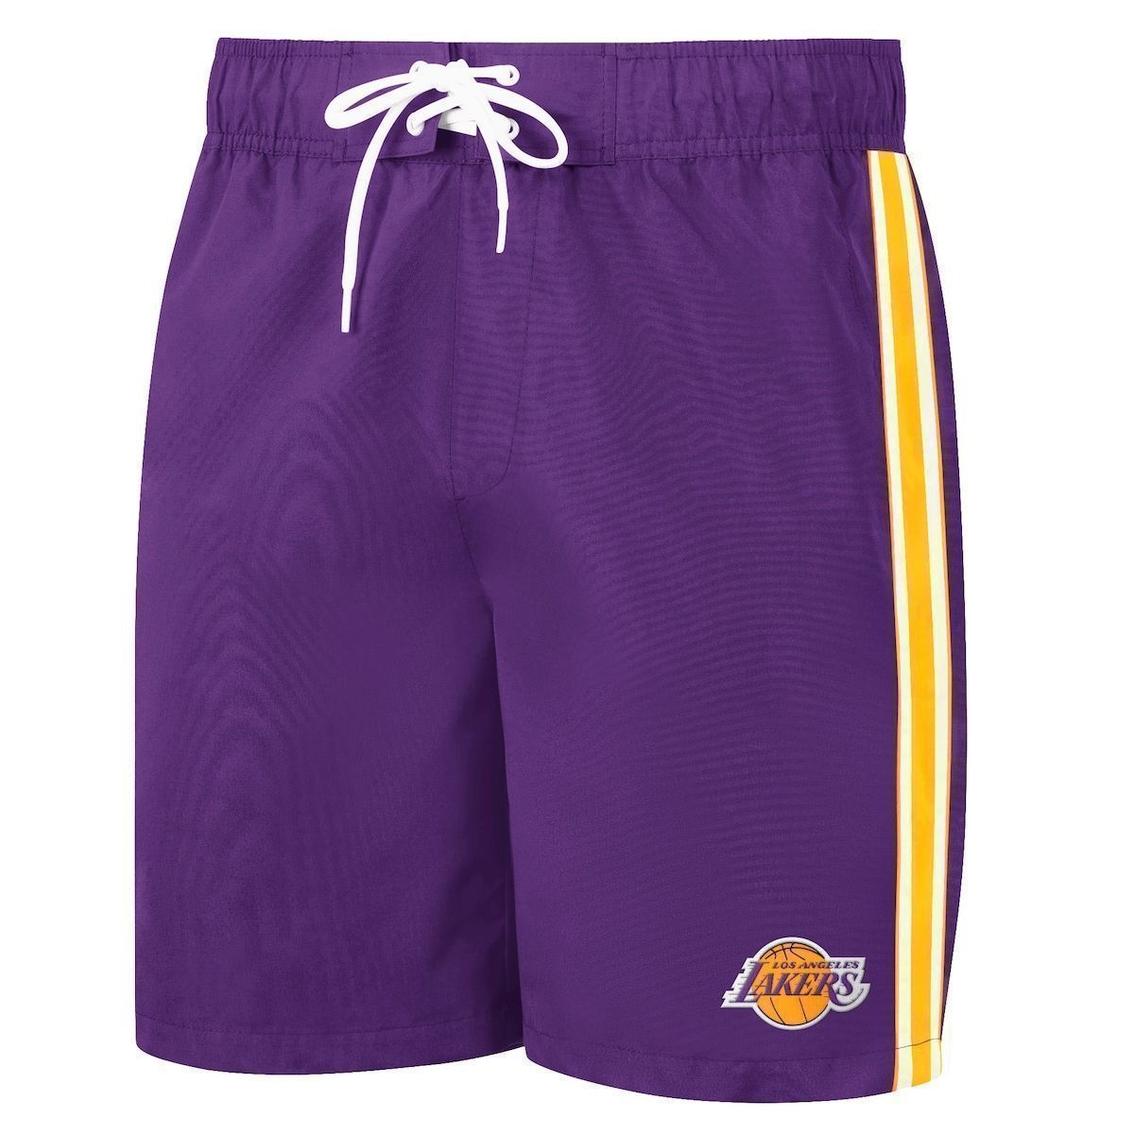 G-III Sports by Carl Banks Men's LA Lakers Sand Beach Volley Swim Shorts - Image 3 of 4